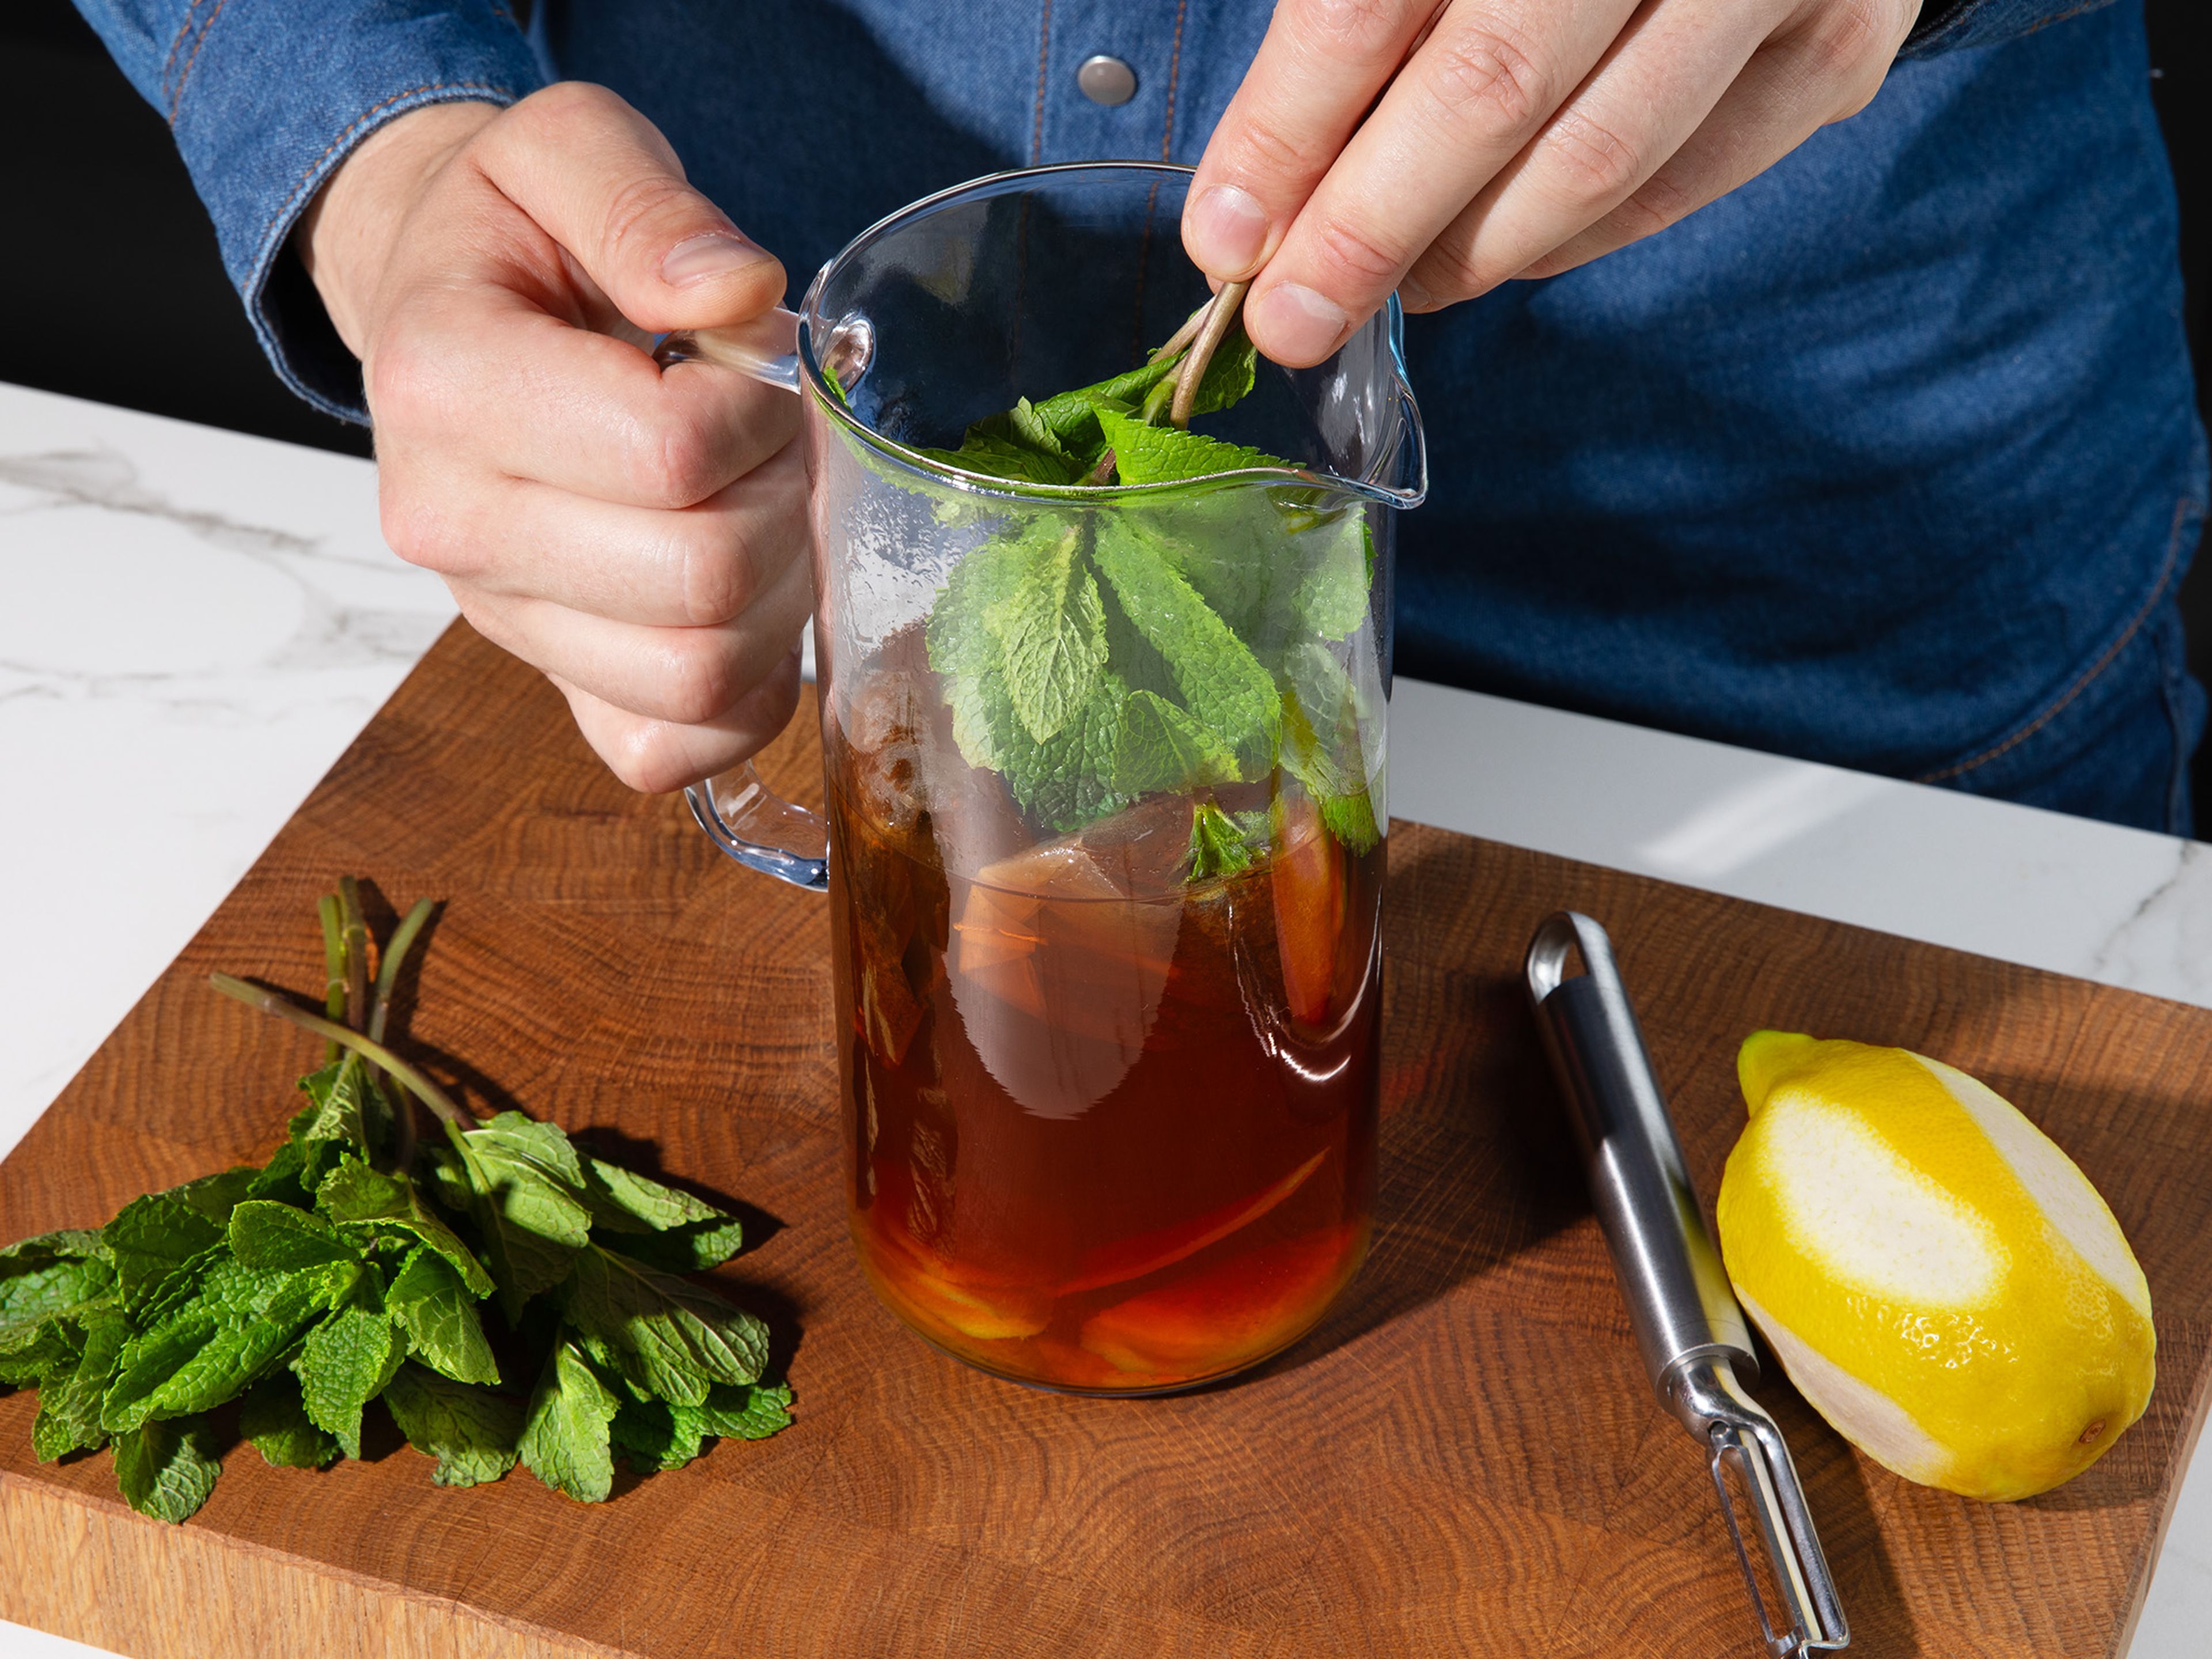 In the meantime, boil water in a kettle or on the stove. Place tea bags, sprigs of mint, and lemon peels in a jug and pour the boiling water over. Let sit for approx. 5 min. Remove tea bags, lemon peels, and mint. Allow to cool slightly.